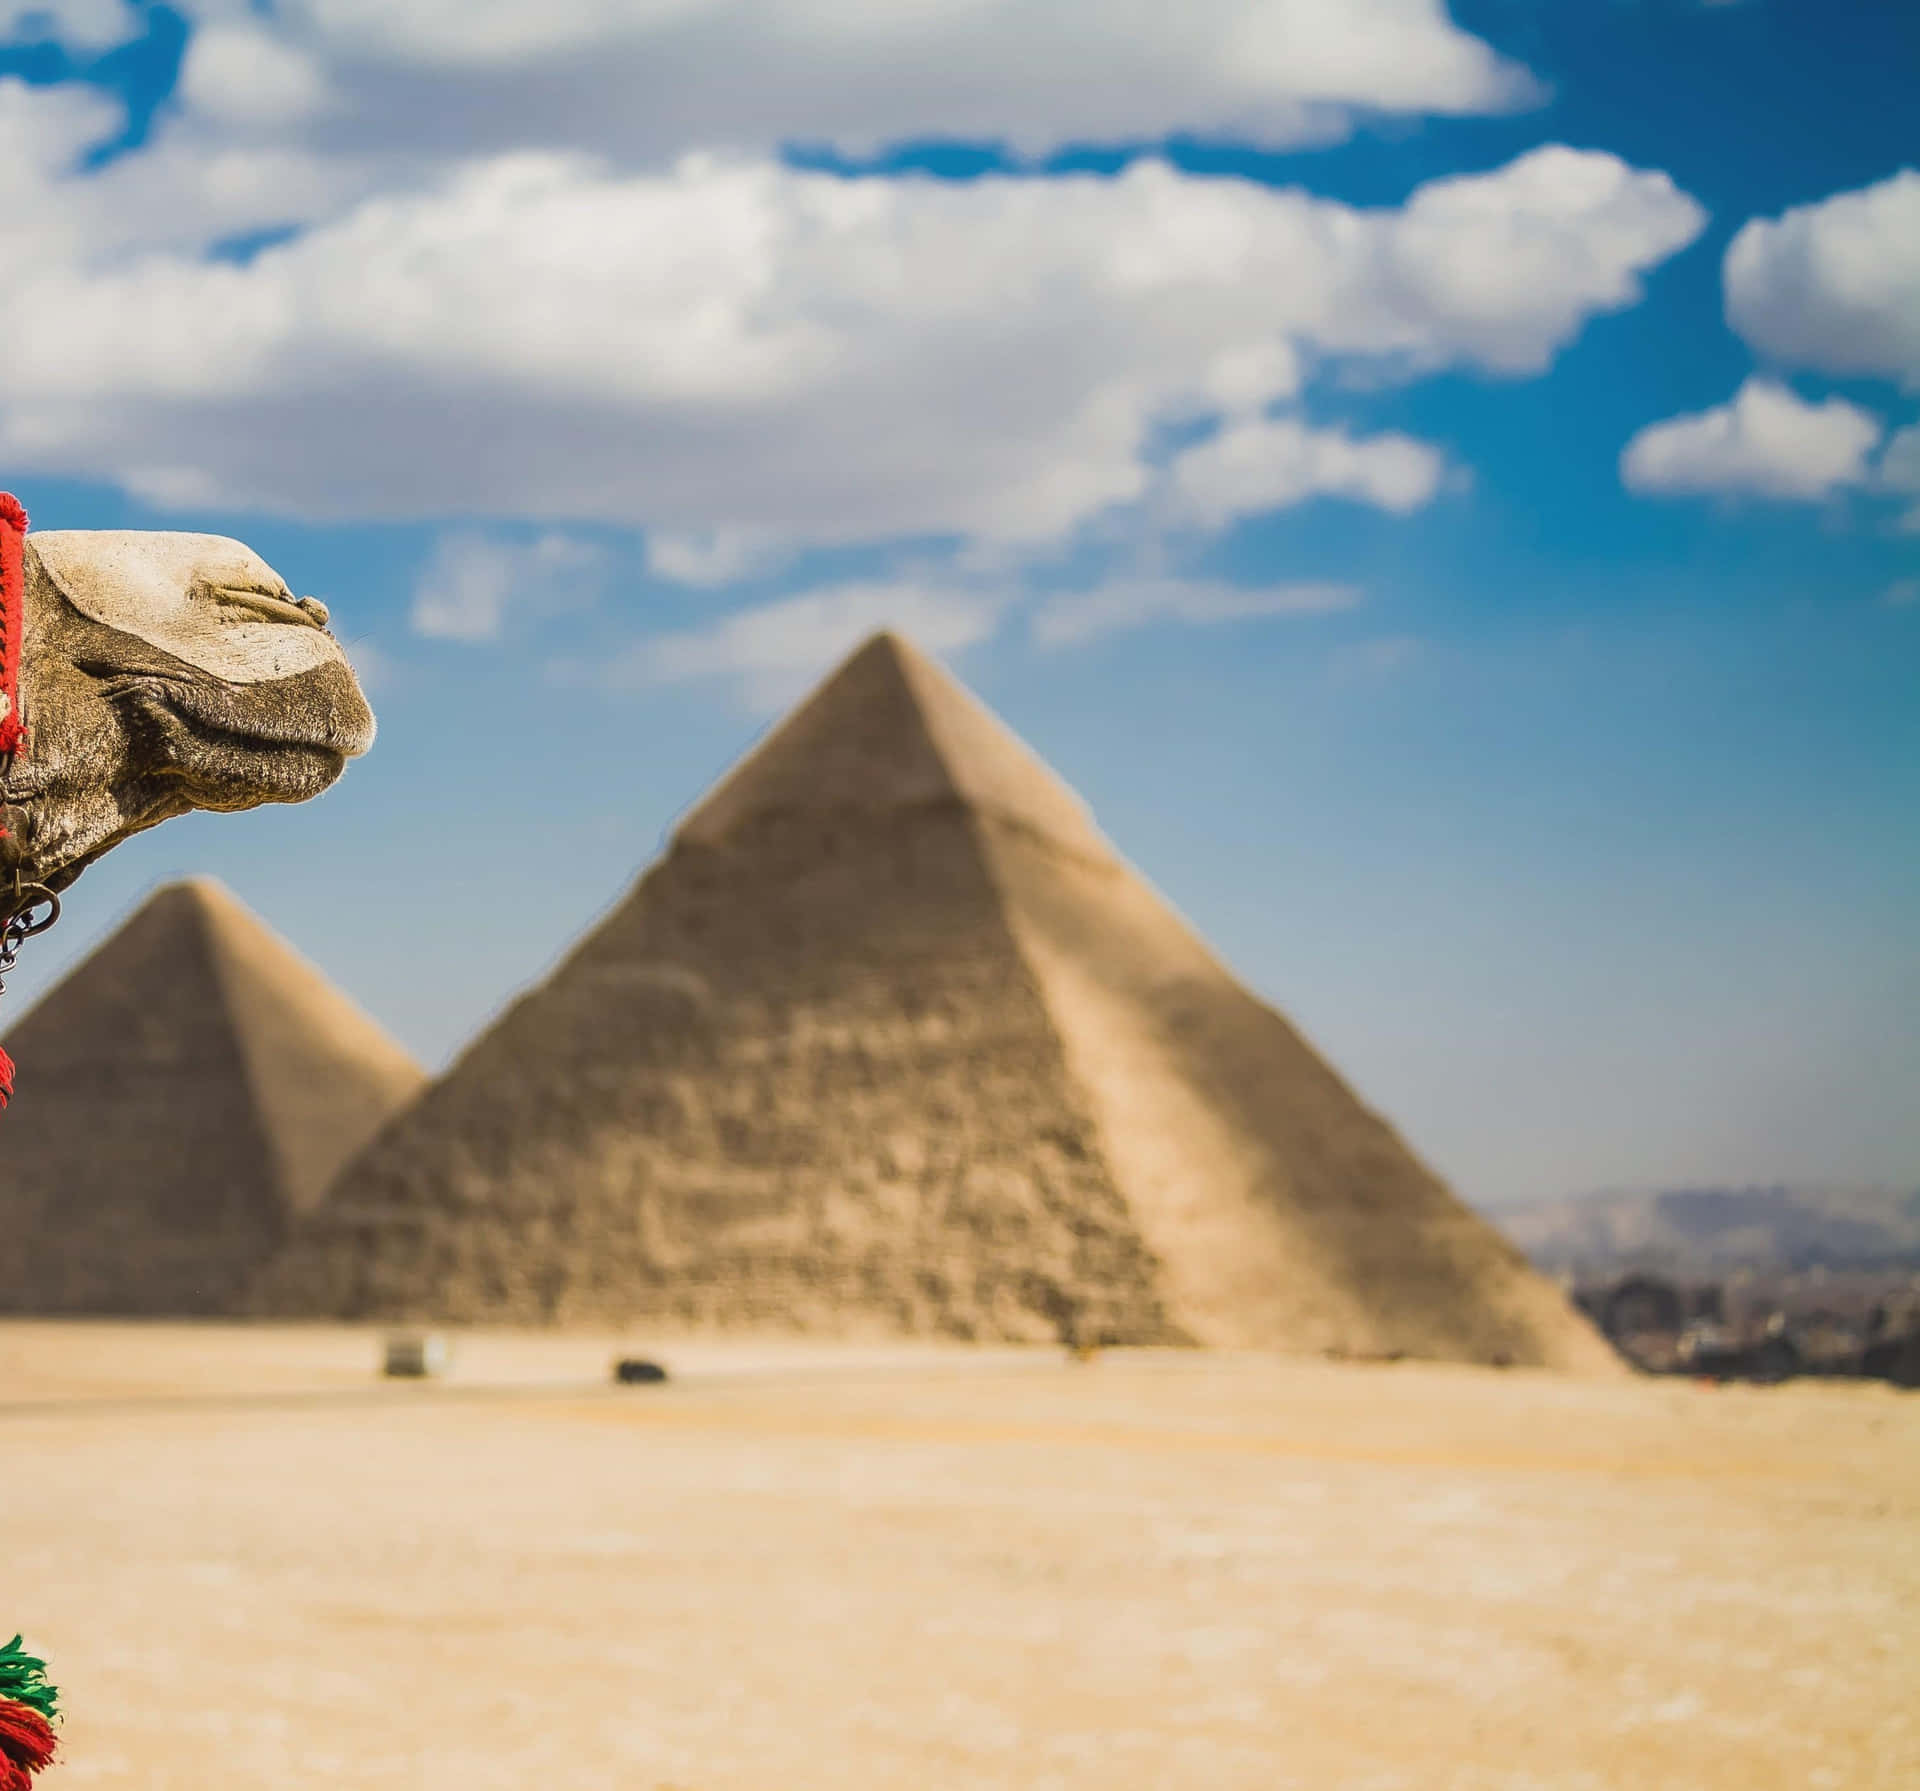 A Camel Is Standing In Front Of The Pyramids